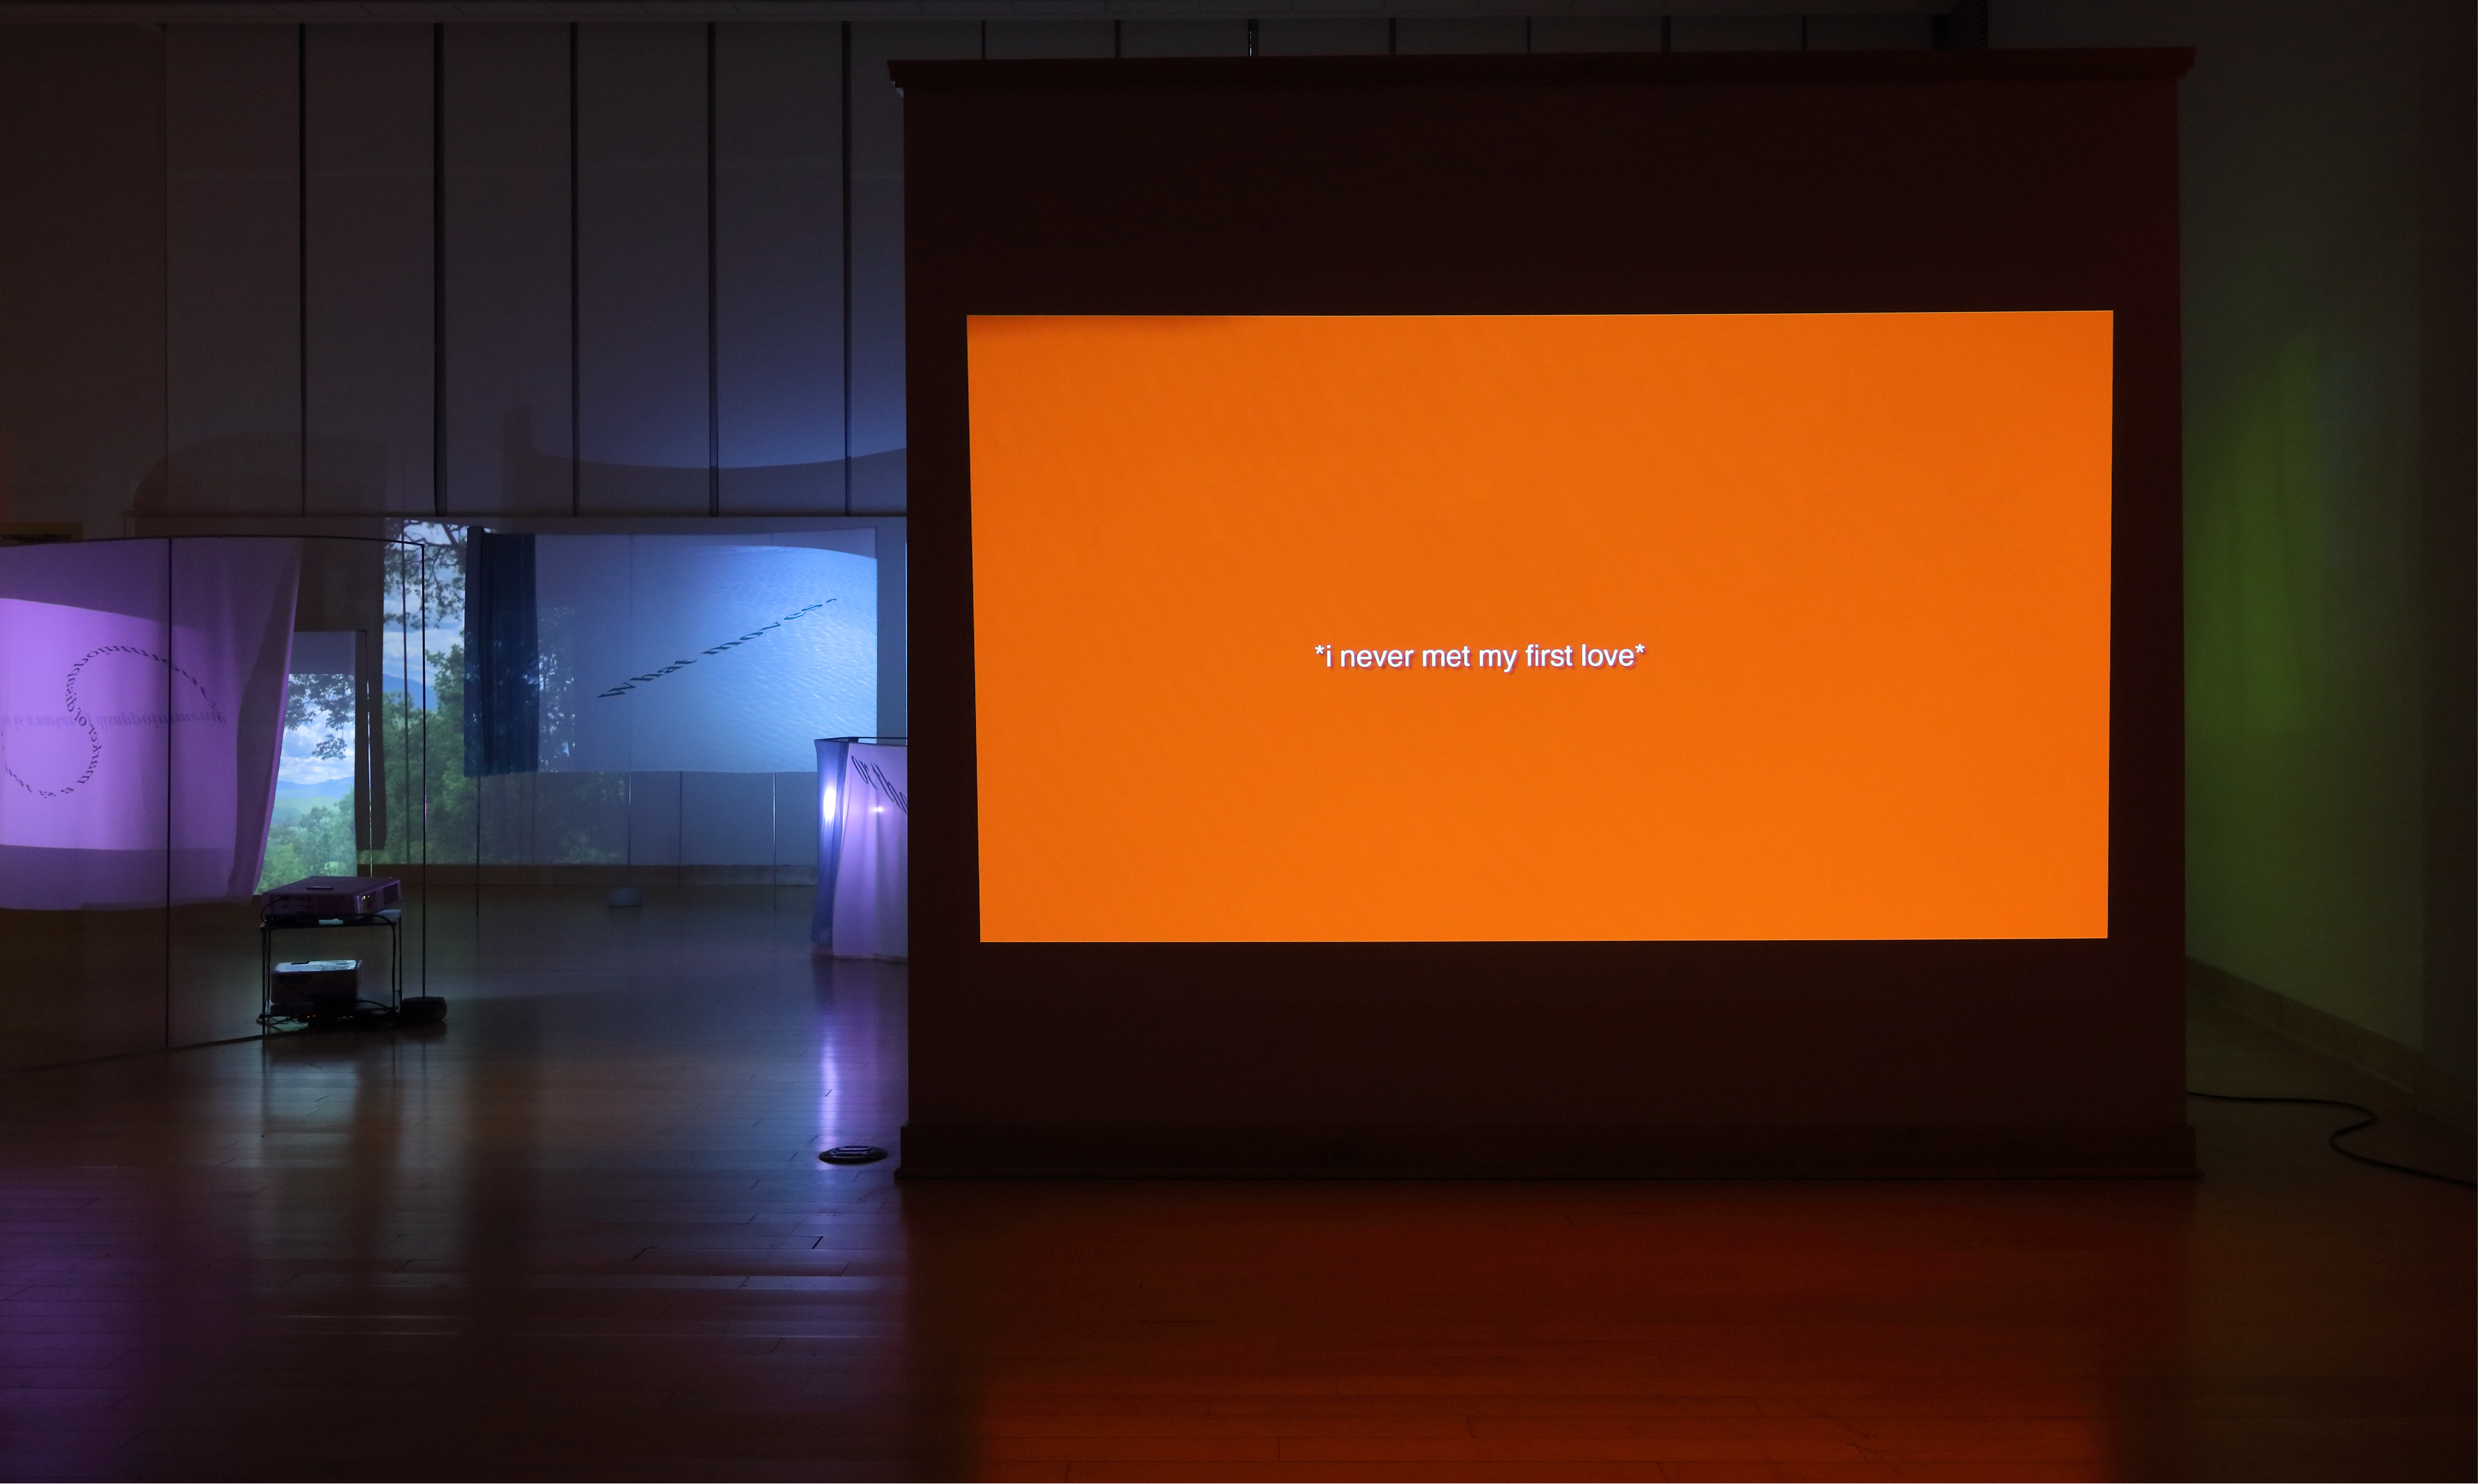 An orange projected screen reads "I never met my first love"